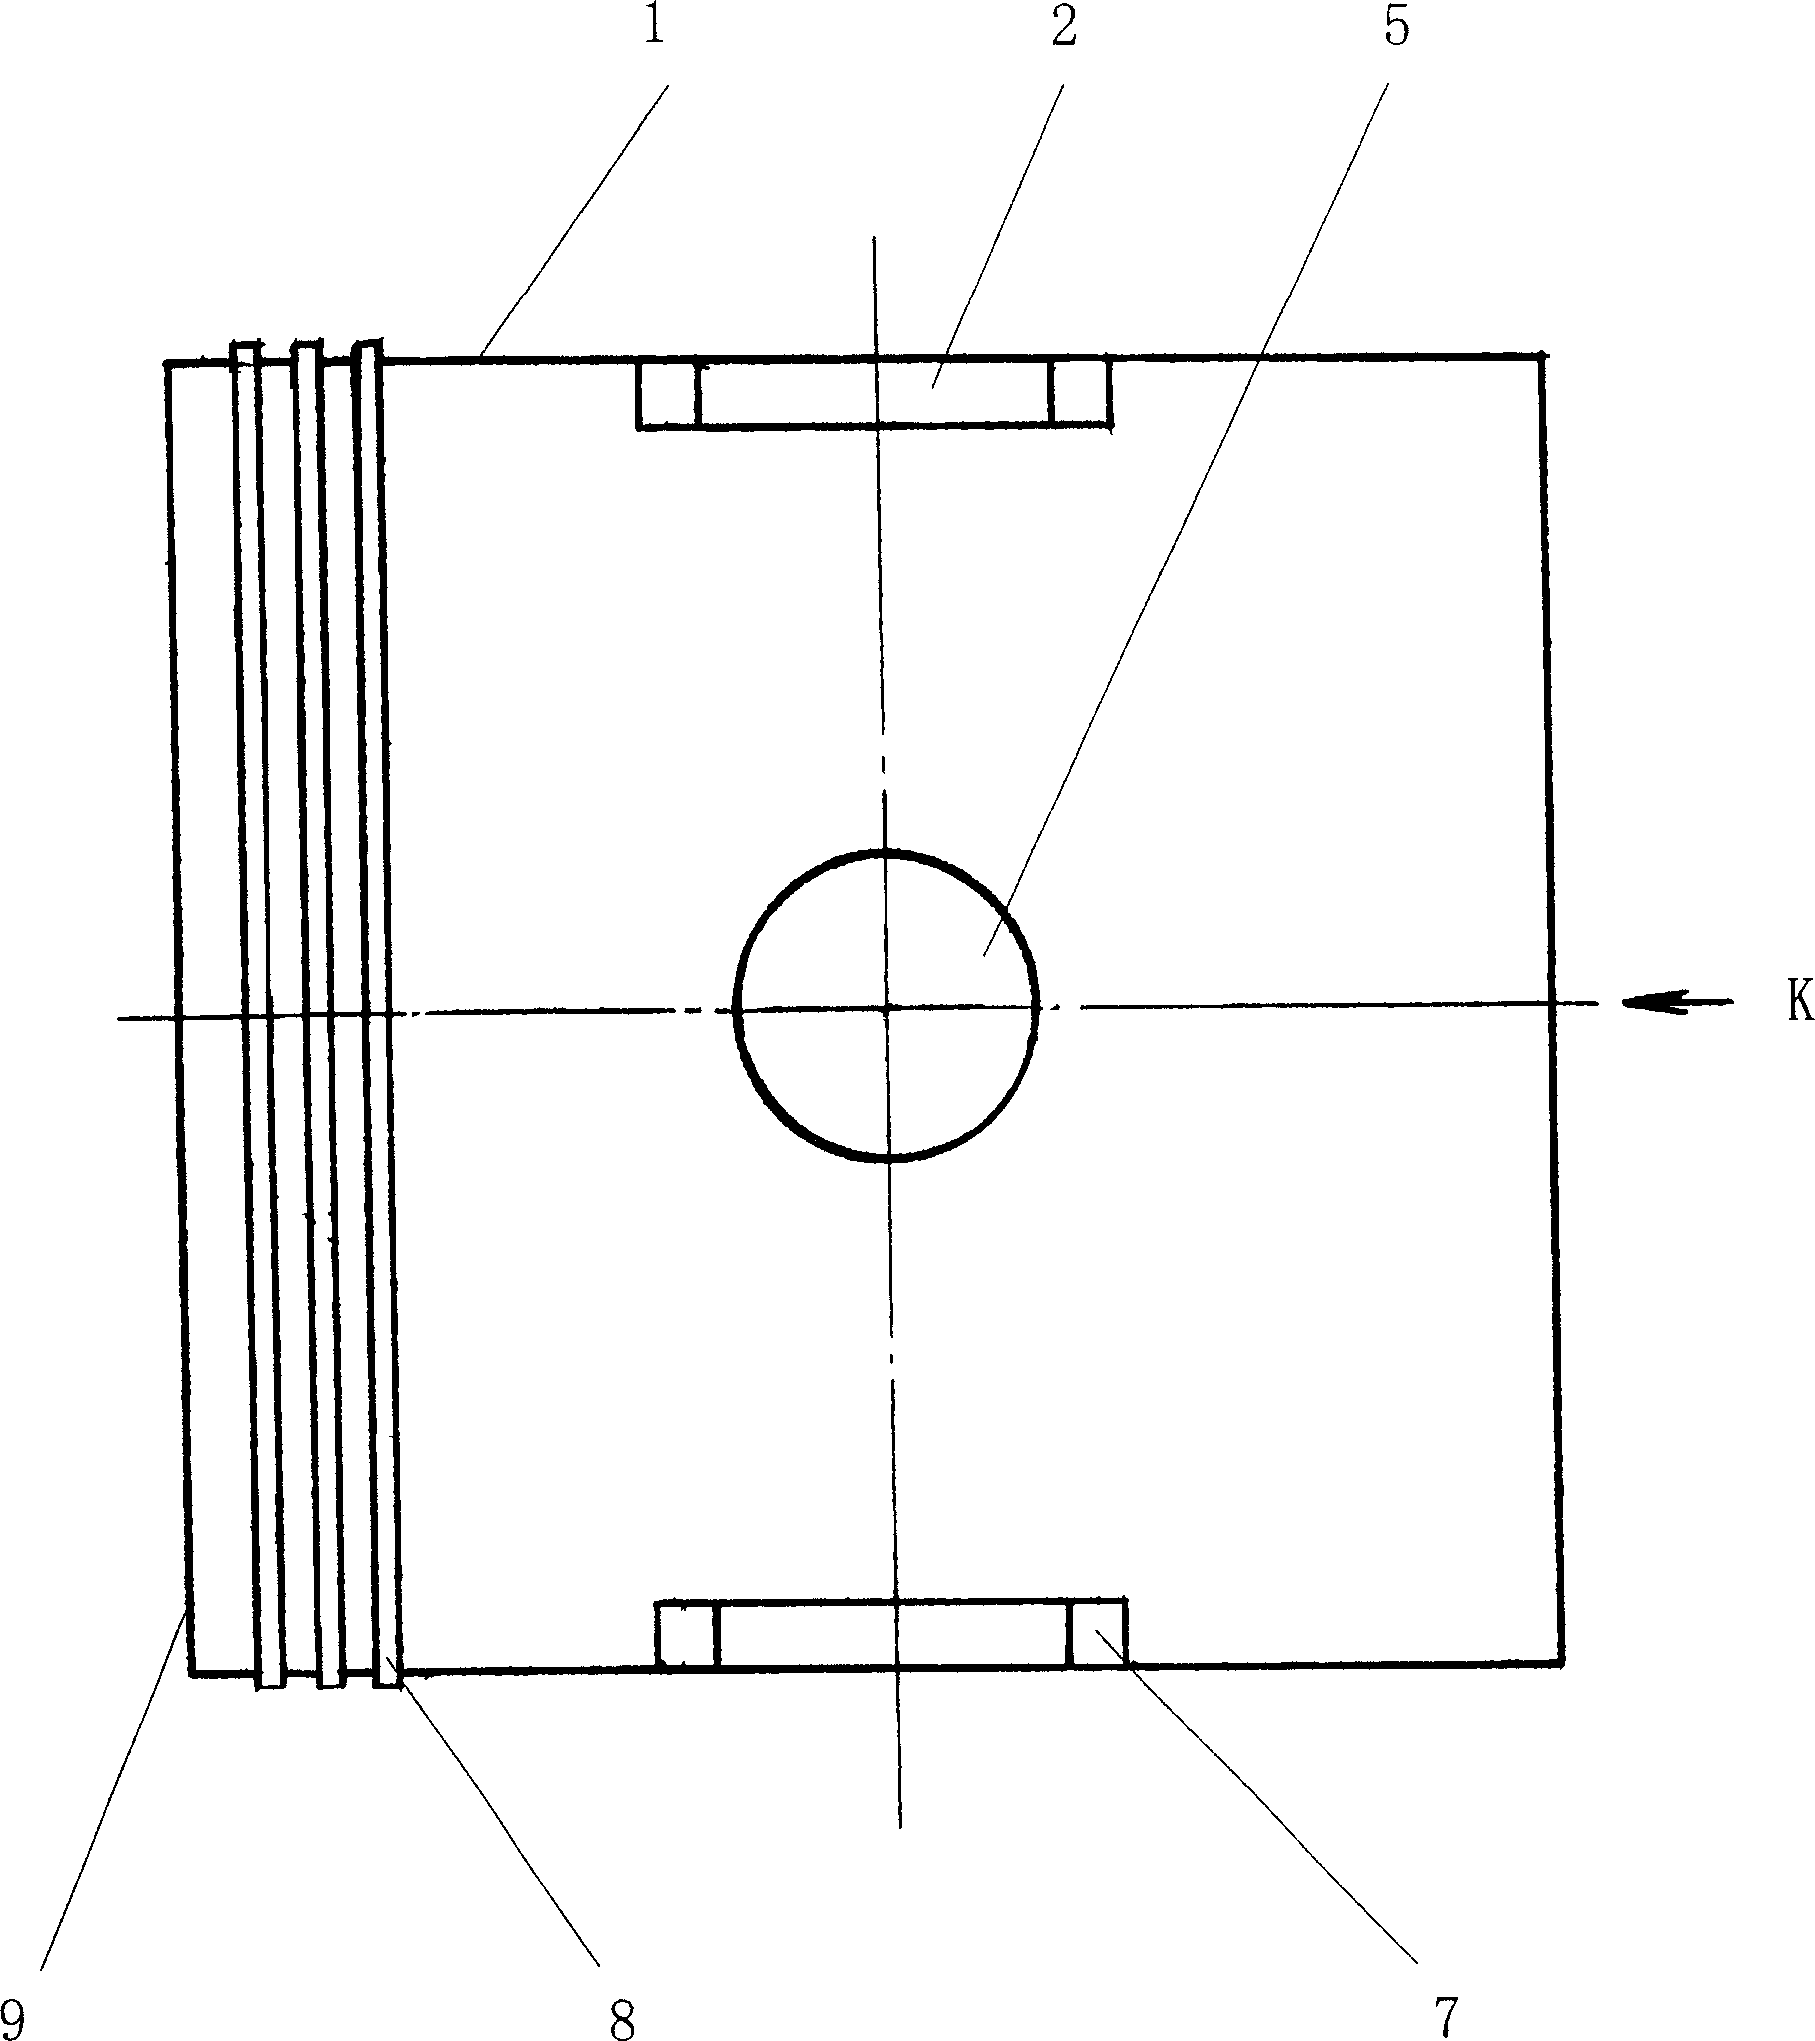 Curved surface rolling bearing type piston for internal combustion engine